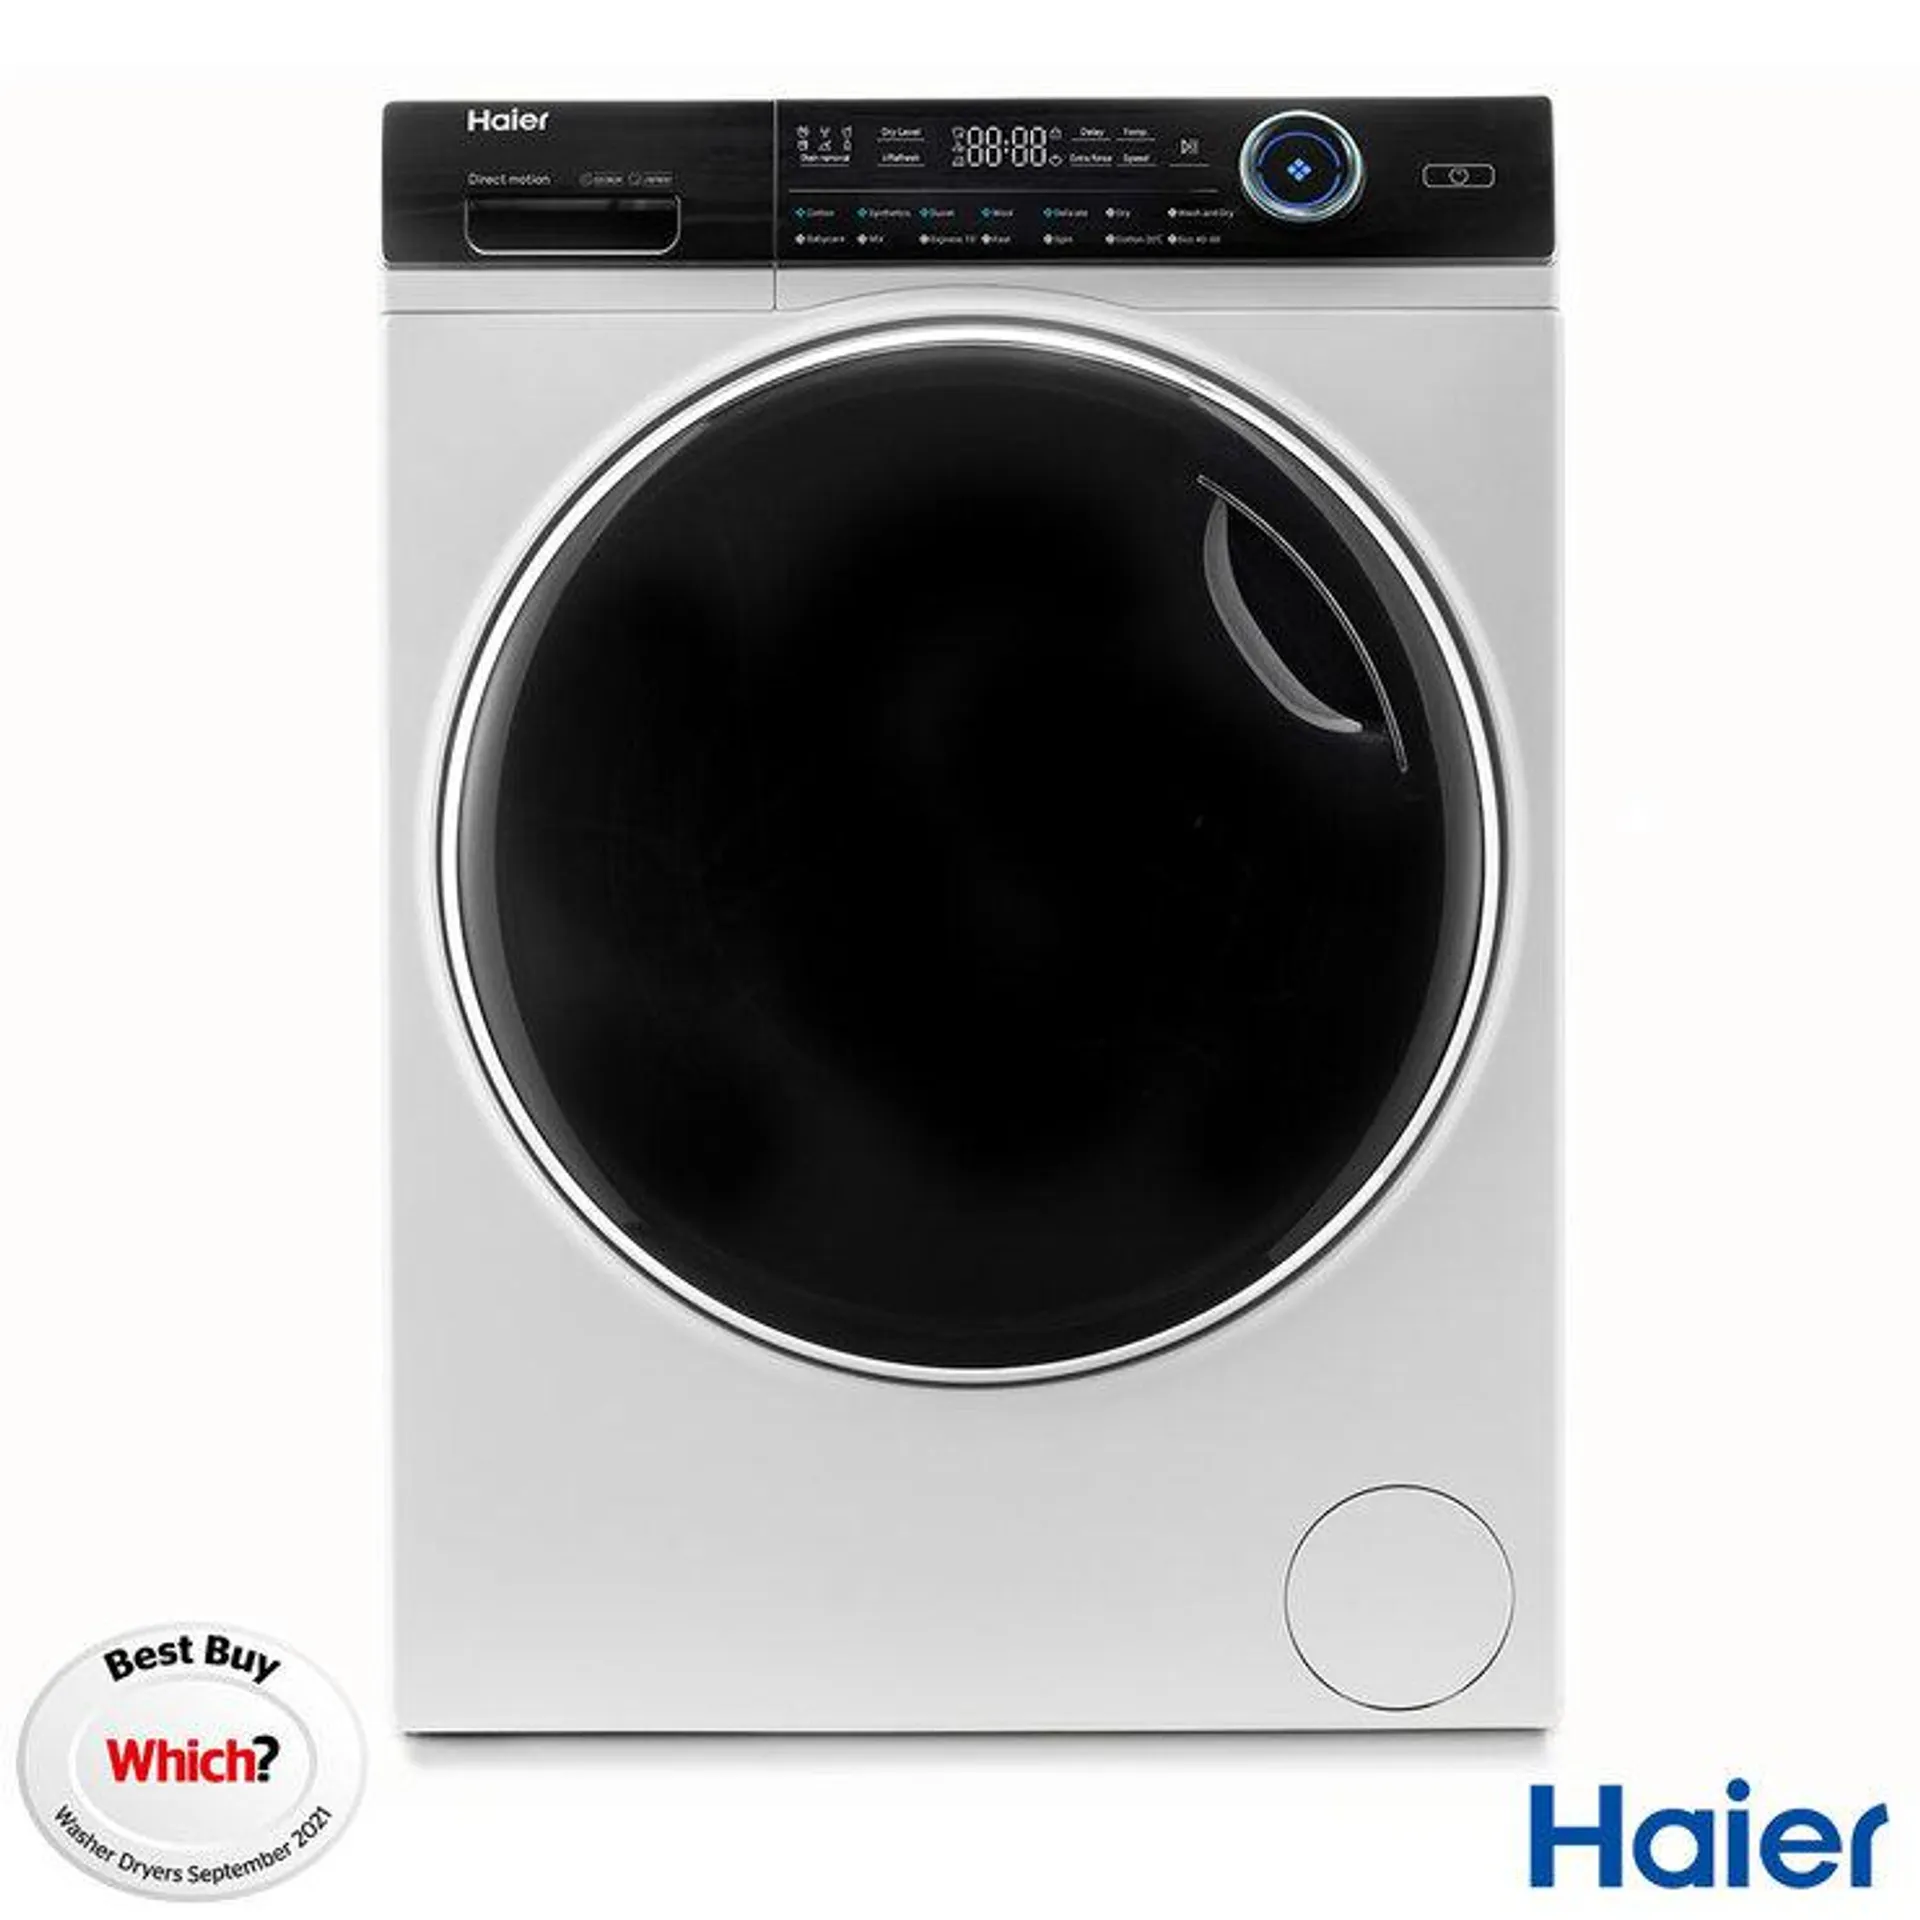 Haier I-Pro 7 Series HWD120-B14979, 12/8kg, 1400rpm Washer Dryer, E Rated in White